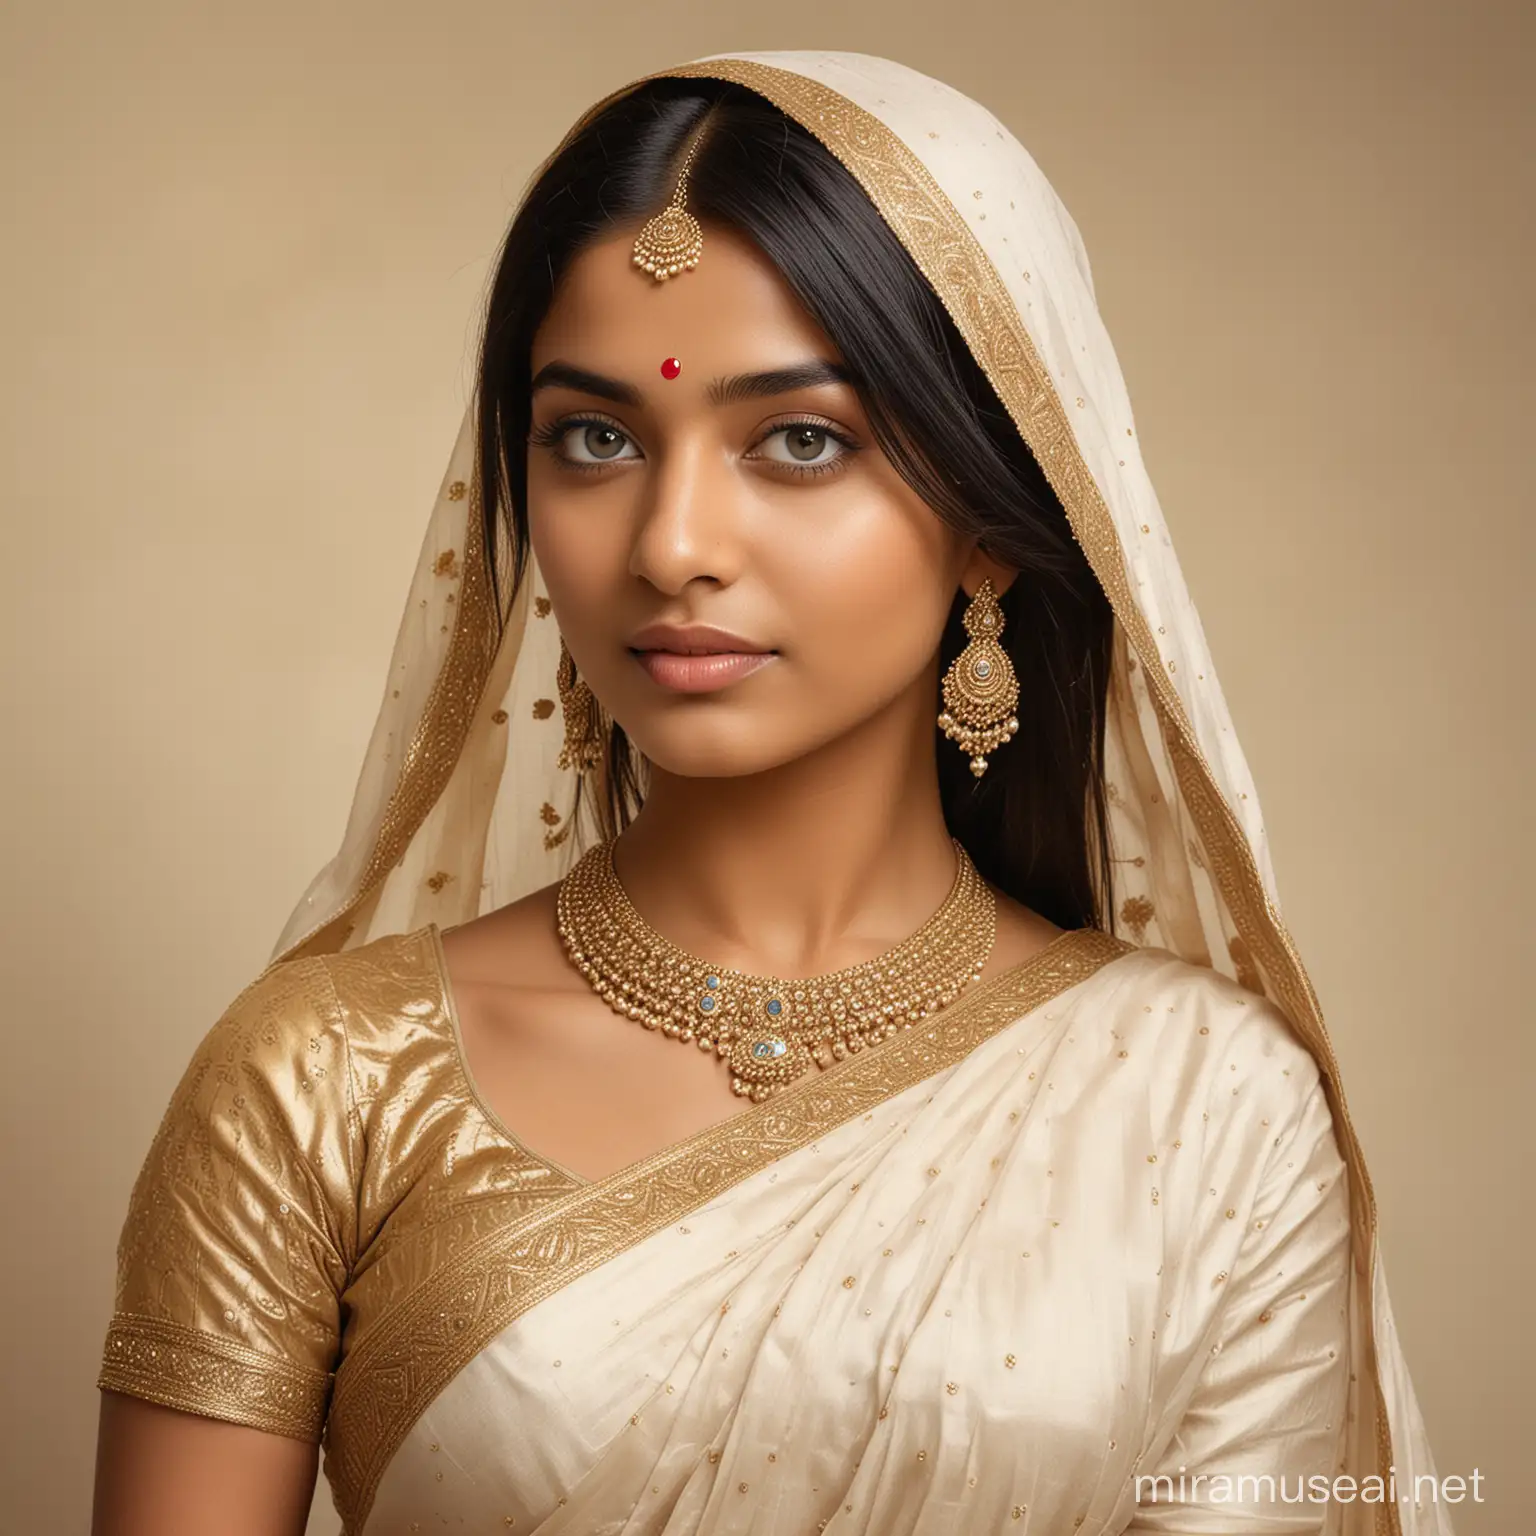 Regal Indian Lady Portrait Young Woman in Ornate Saree